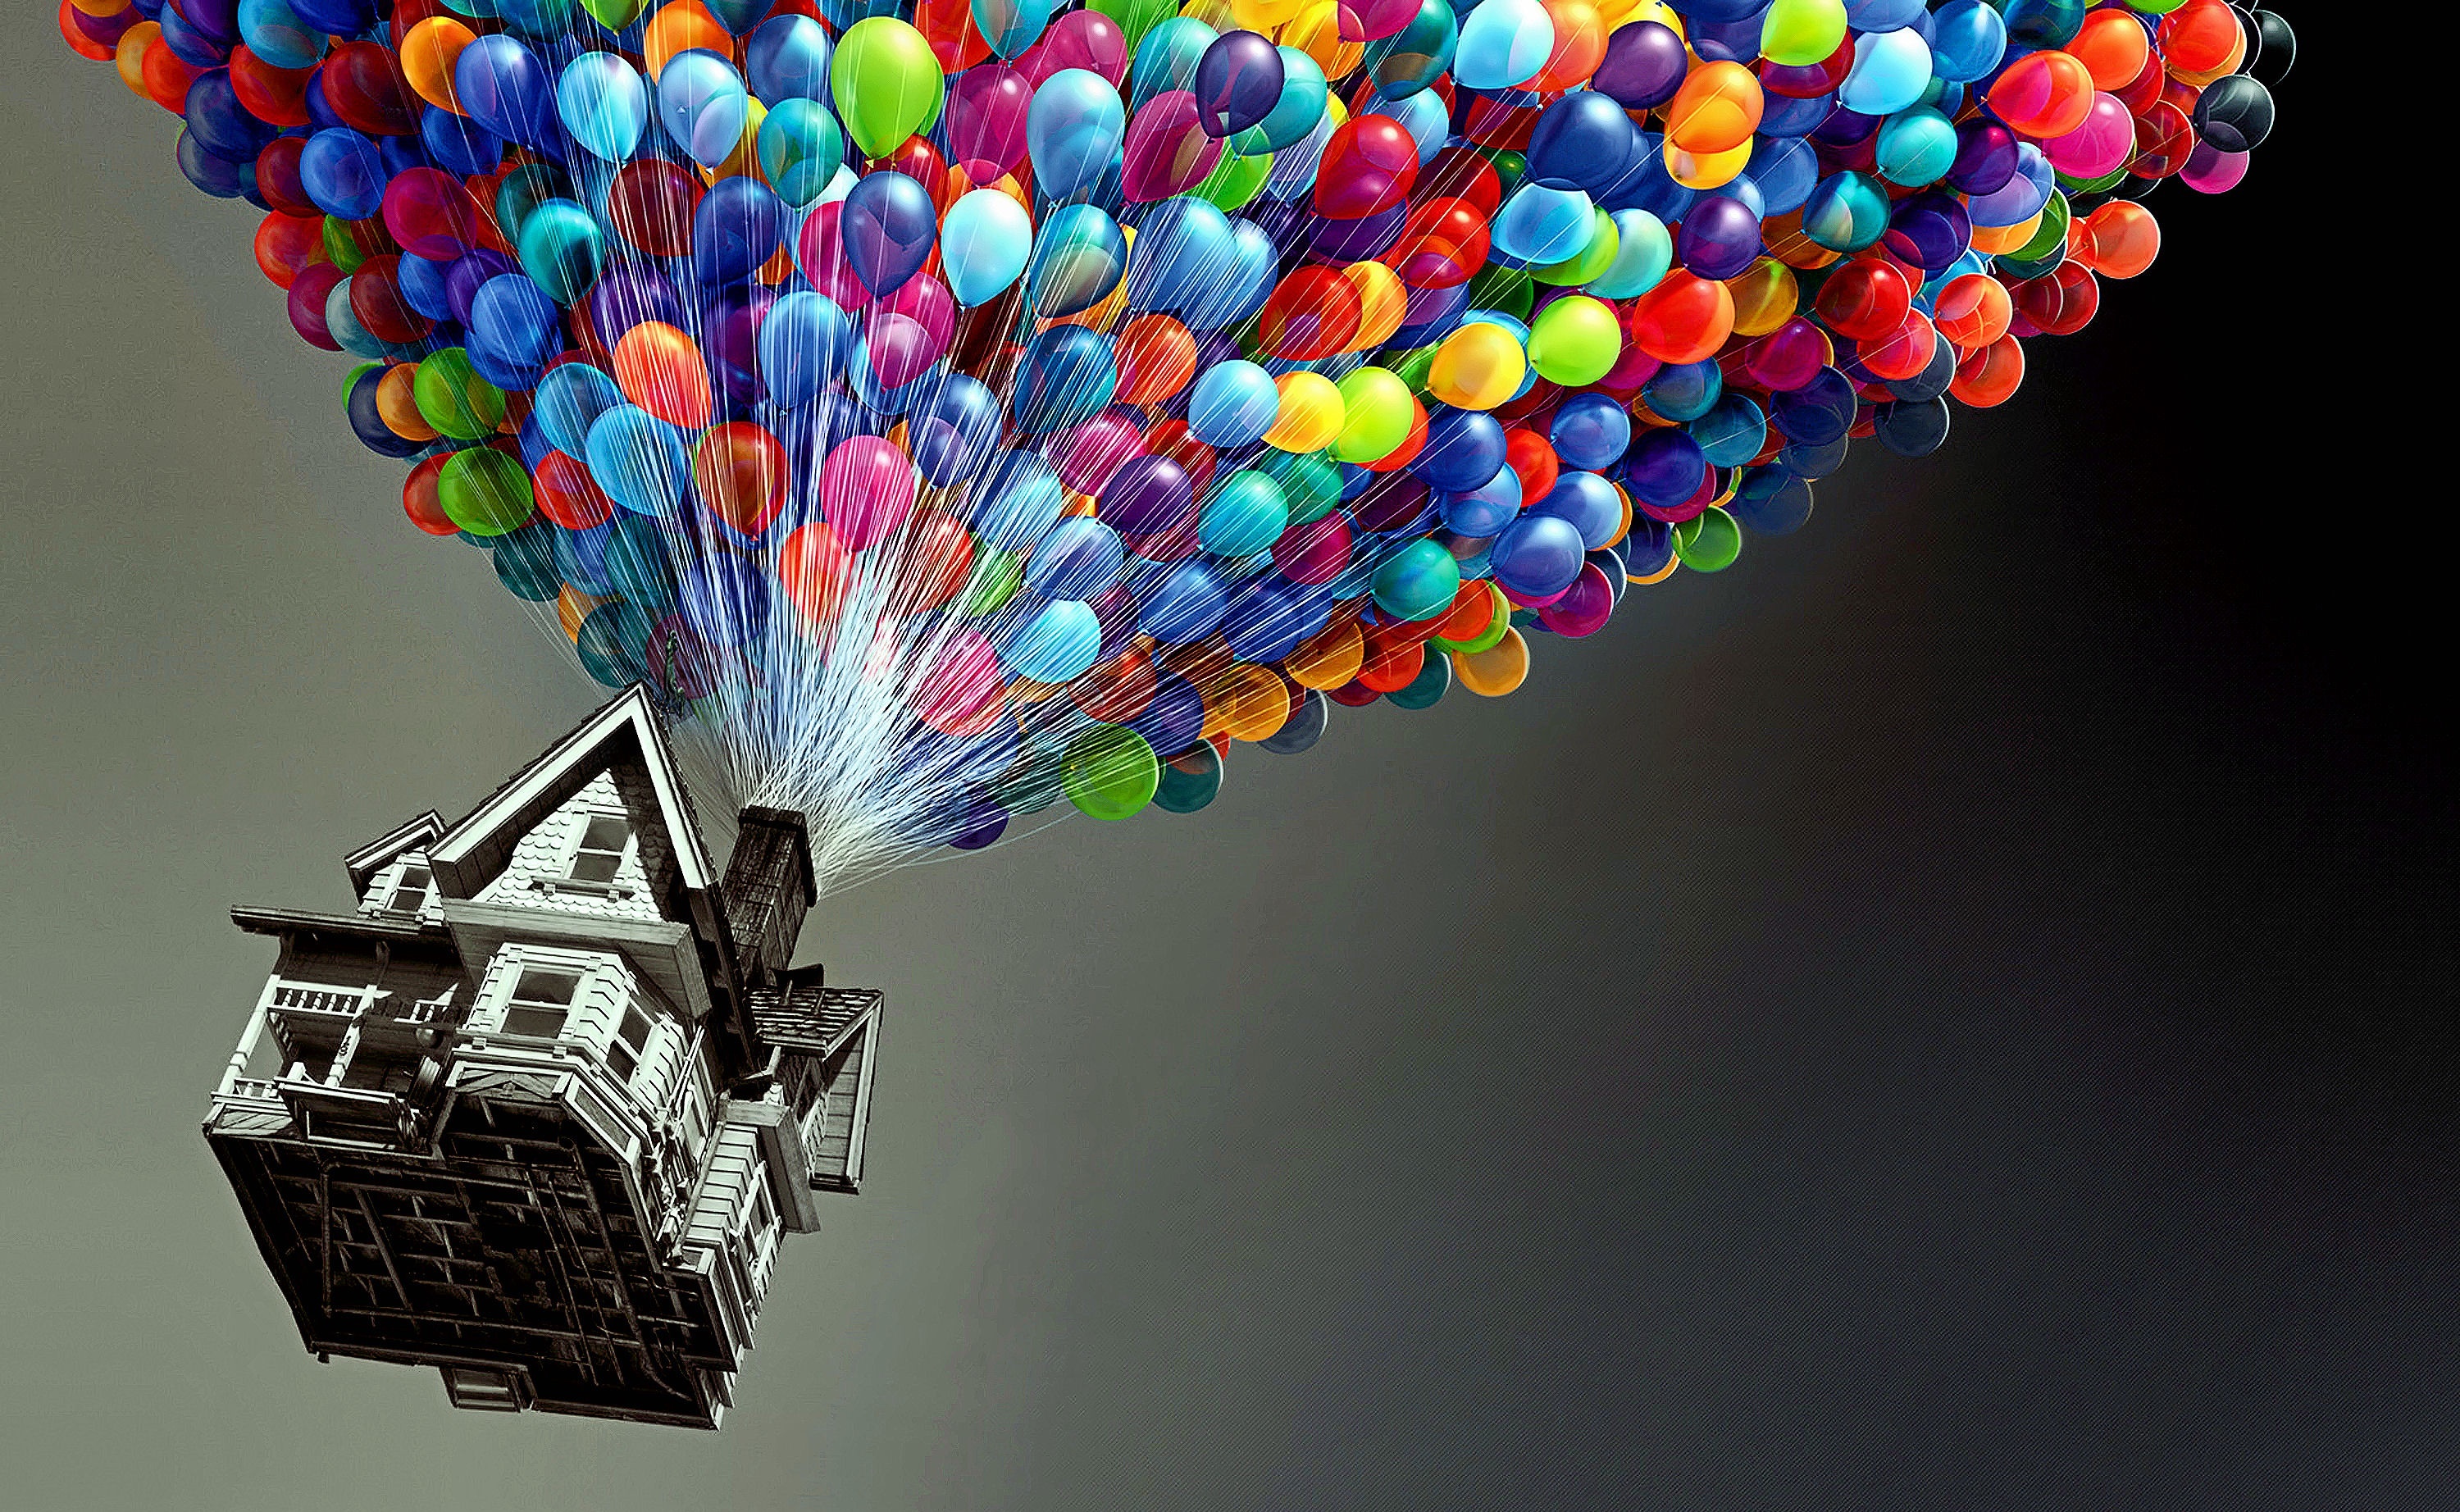 balloon, movie, up High Definition image